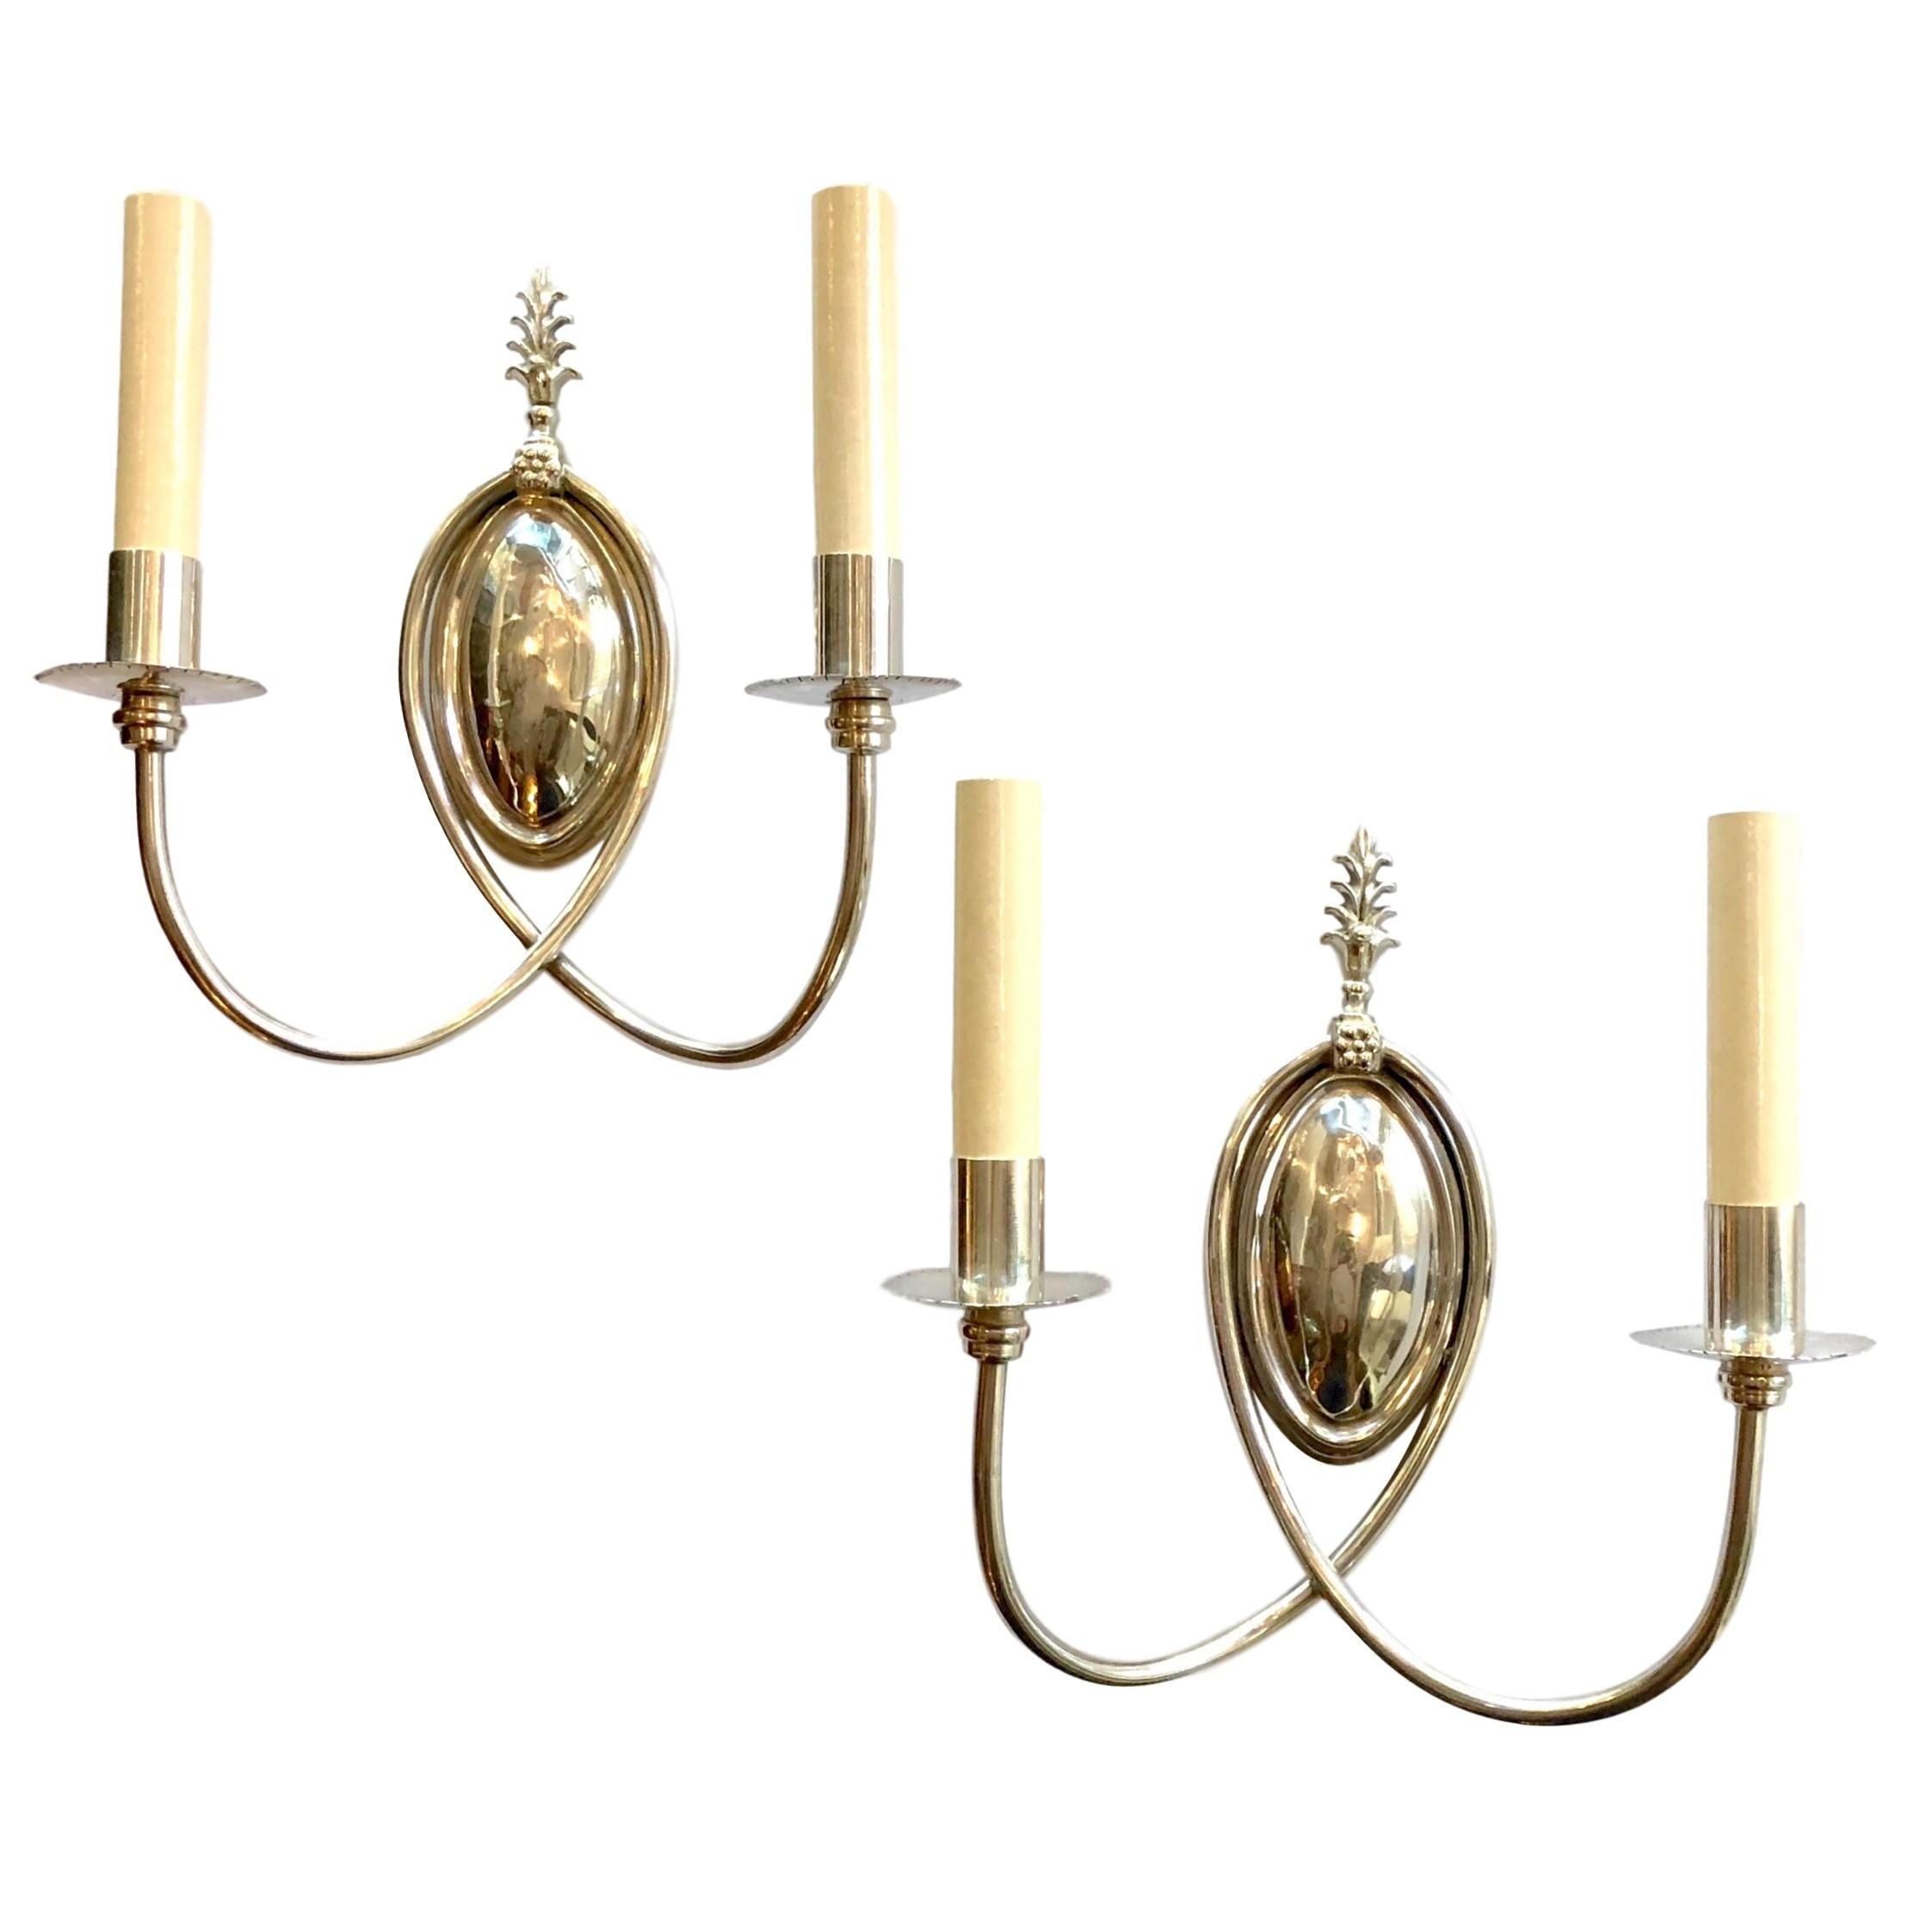 Pair of English Silver-Plated Sconces For Sale